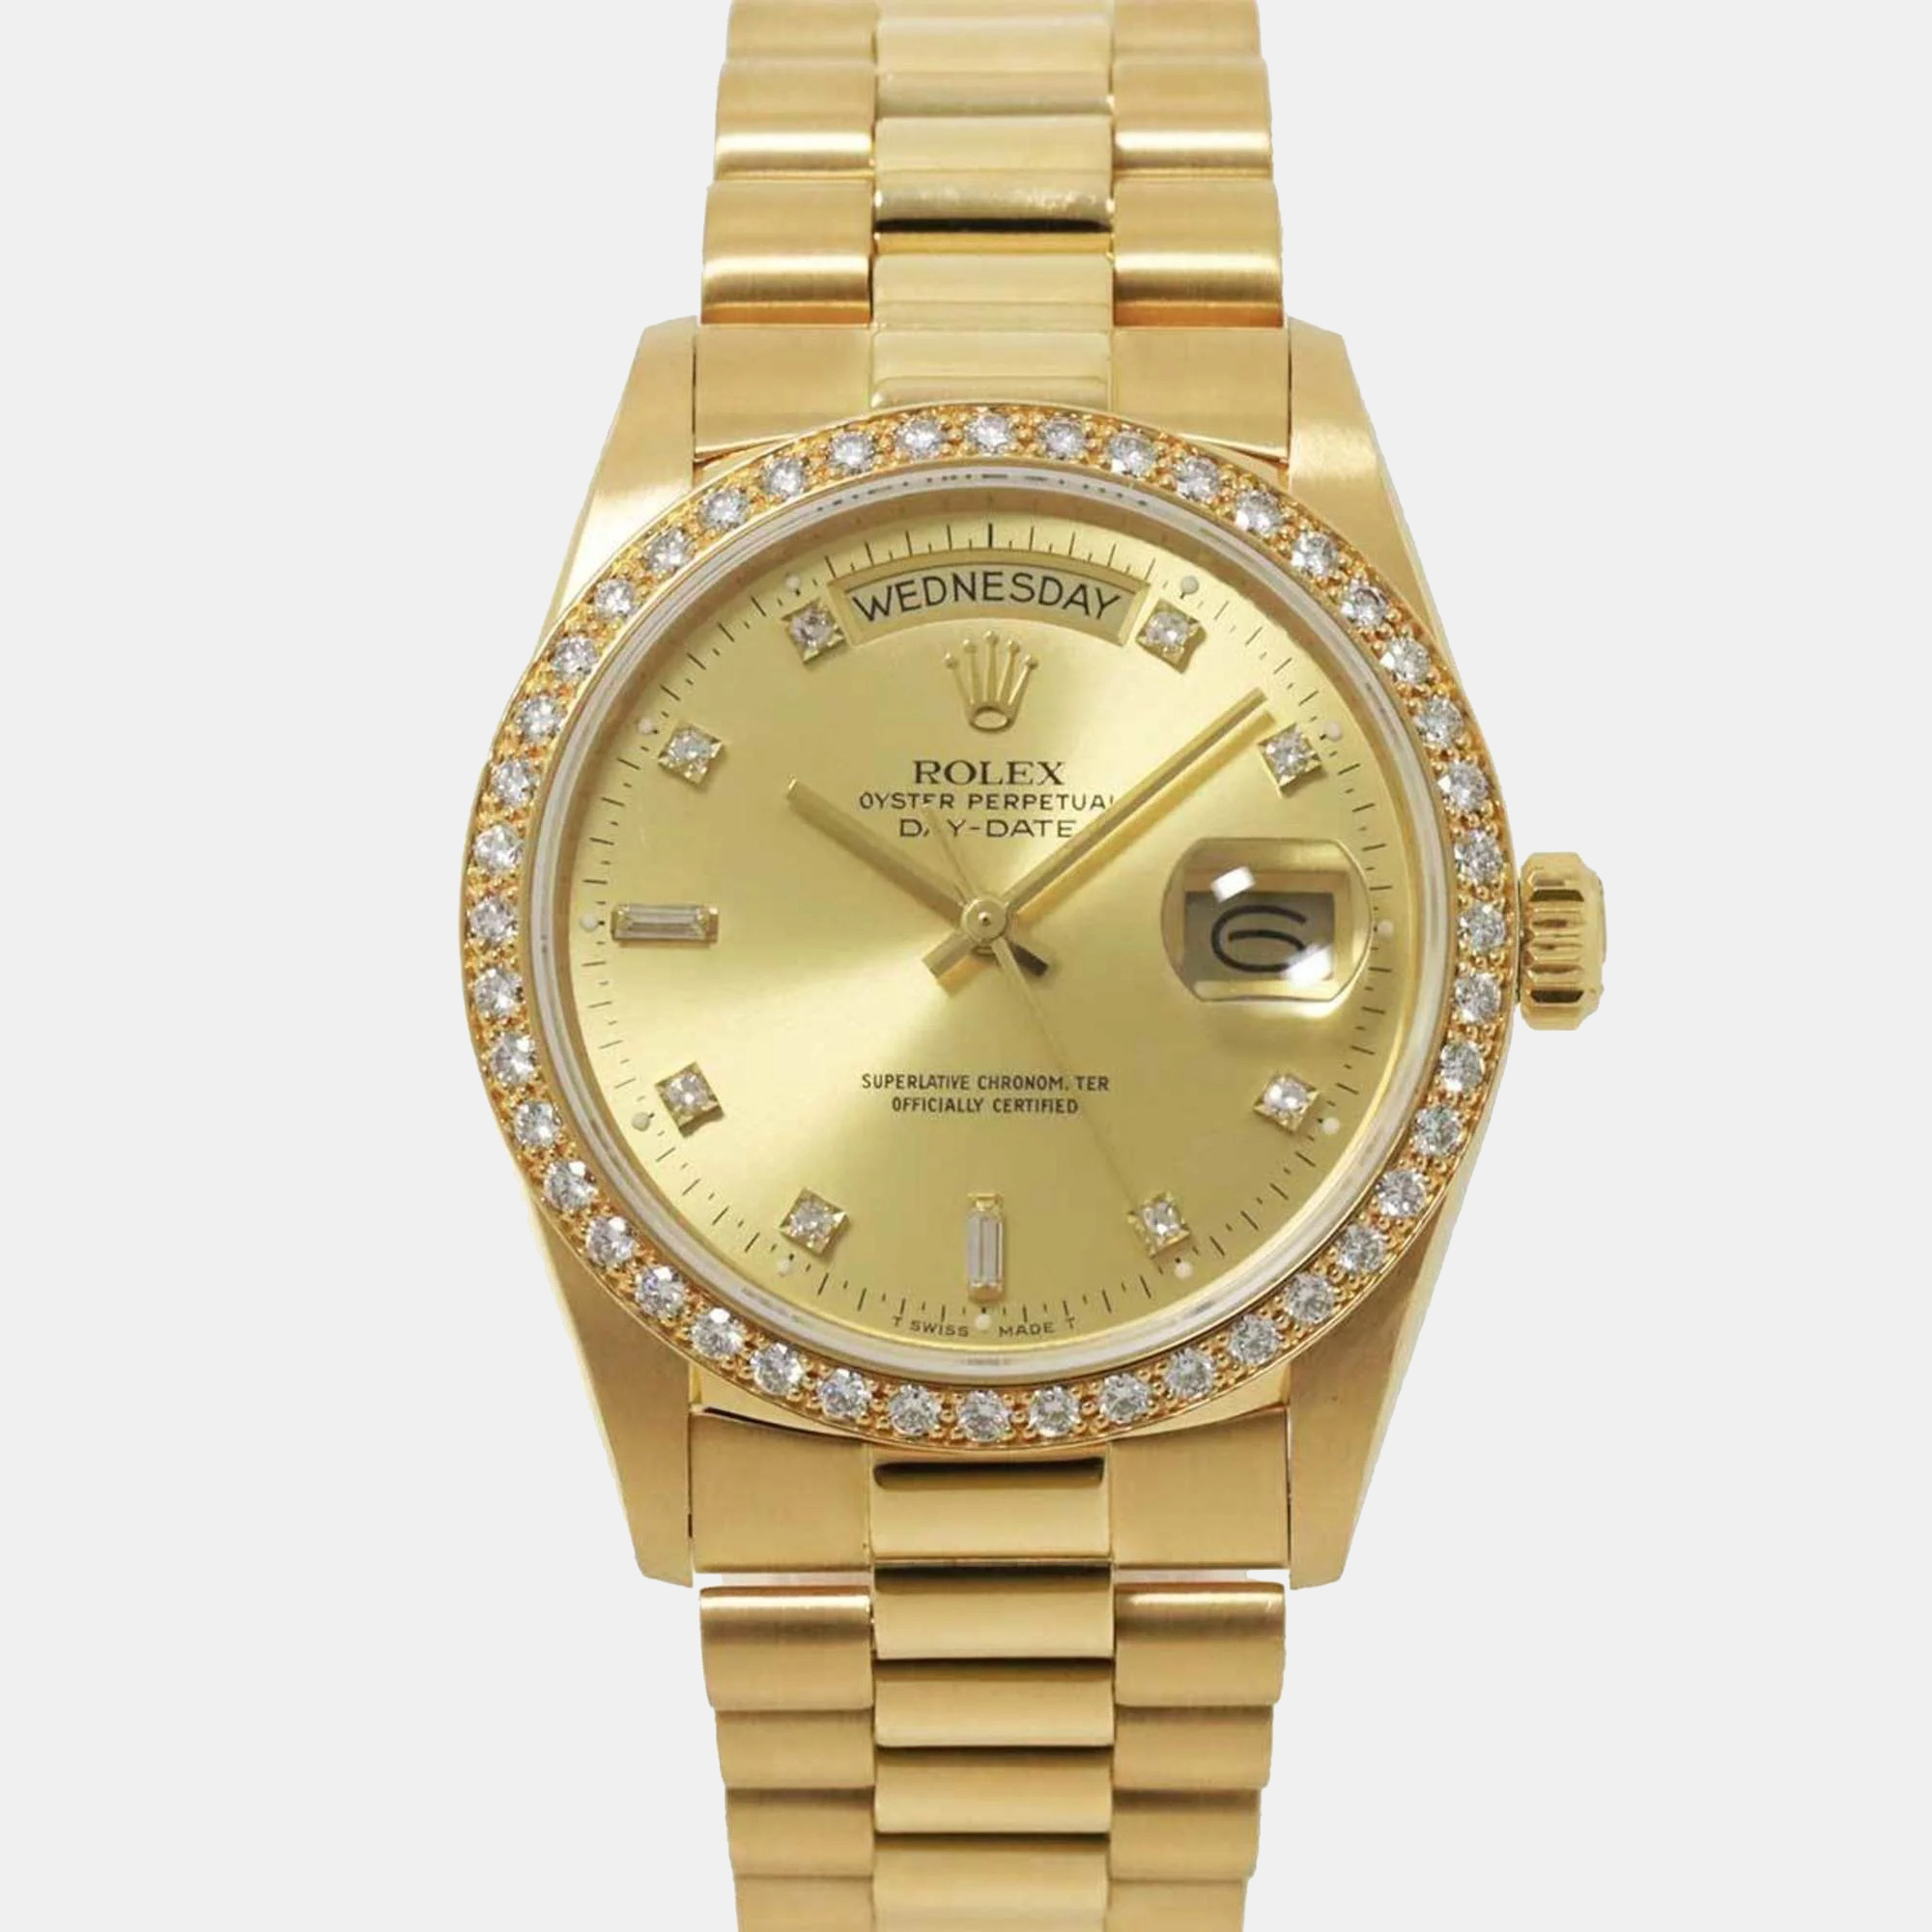 Rolex Champagne 18k Yellow Gold Day-Date 18048 Automatic Men's Wristwatch 36 Mm